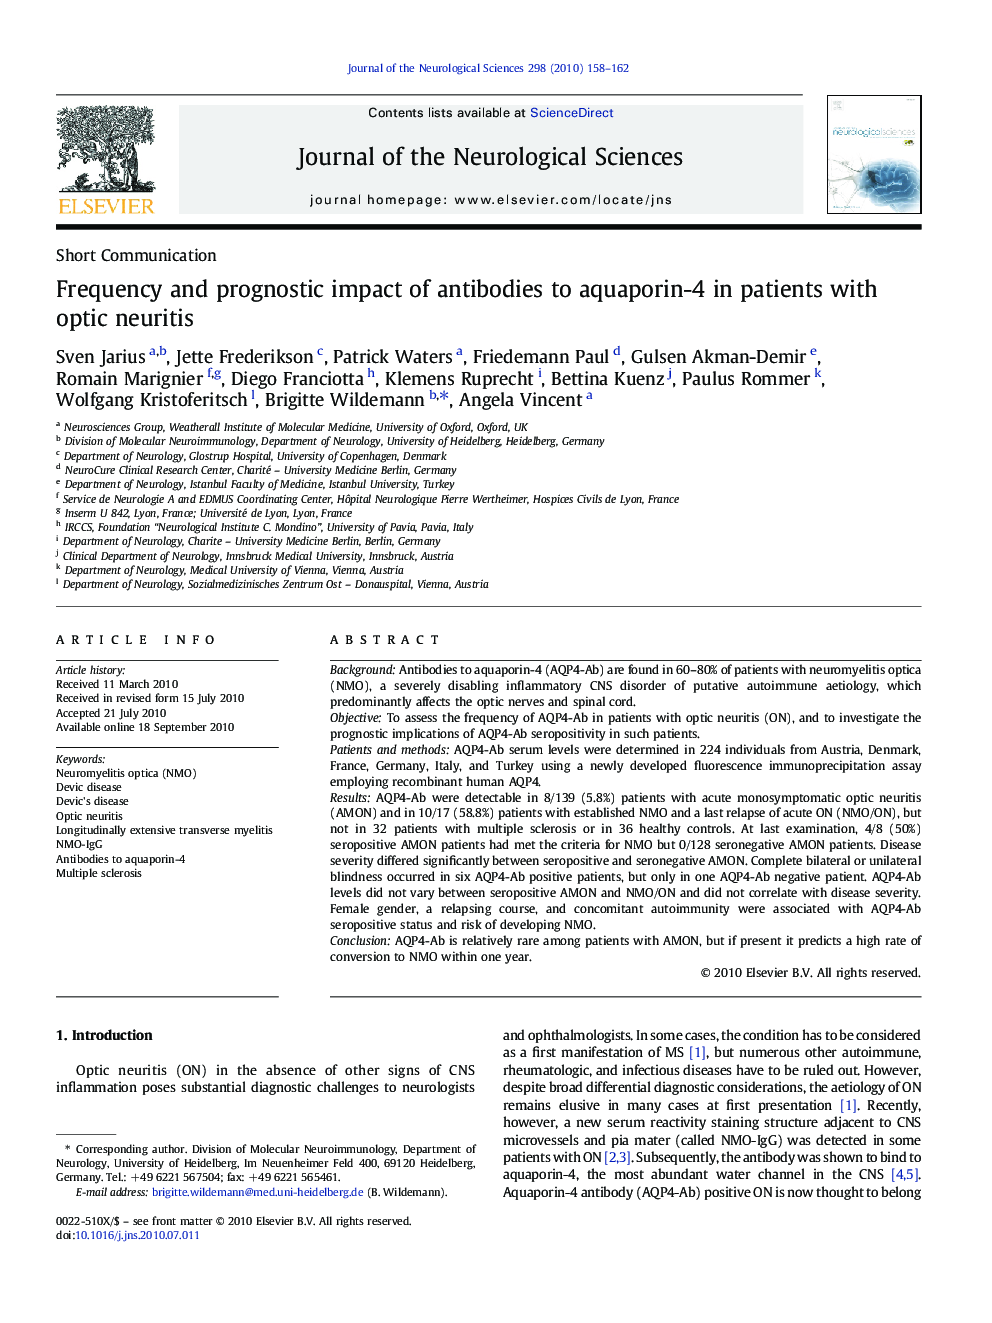 Frequency and prognostic impact of antibodies to aquaporin-4 in patients with optic neuritis